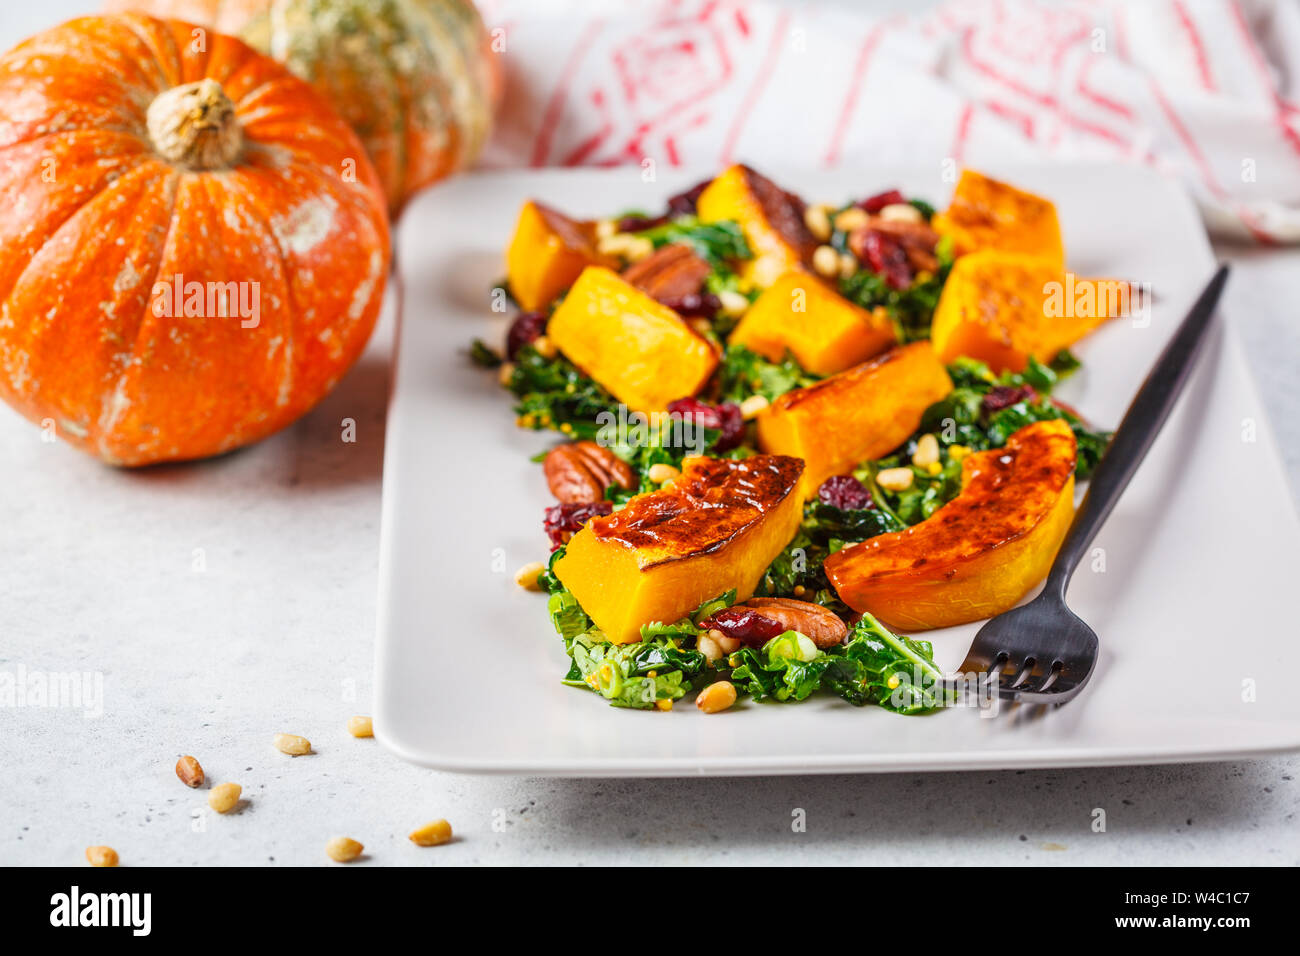 Pumpkin salad with nuts, cranberries and kale in rectangular plate. Stock Photo